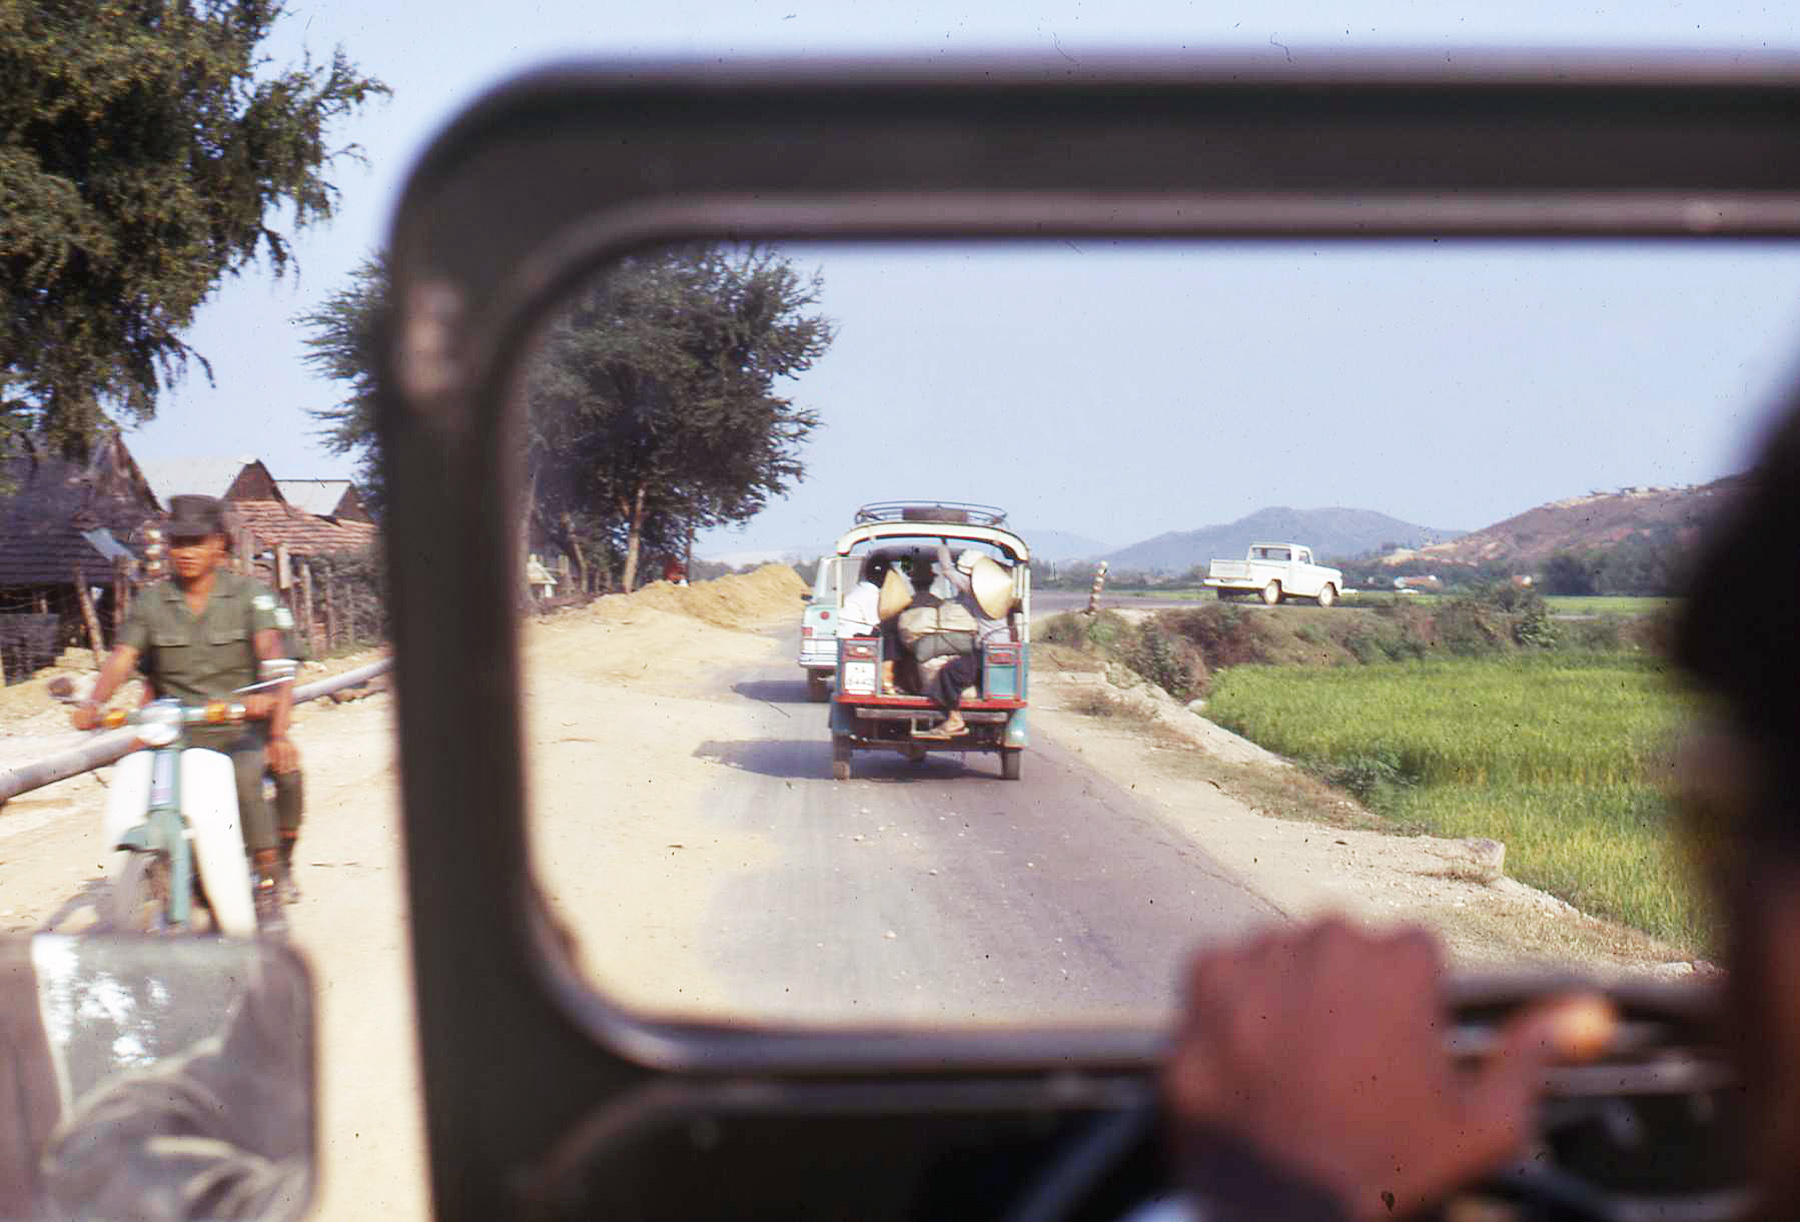 the man rides in a cart with three animals while the other one is driving down a road